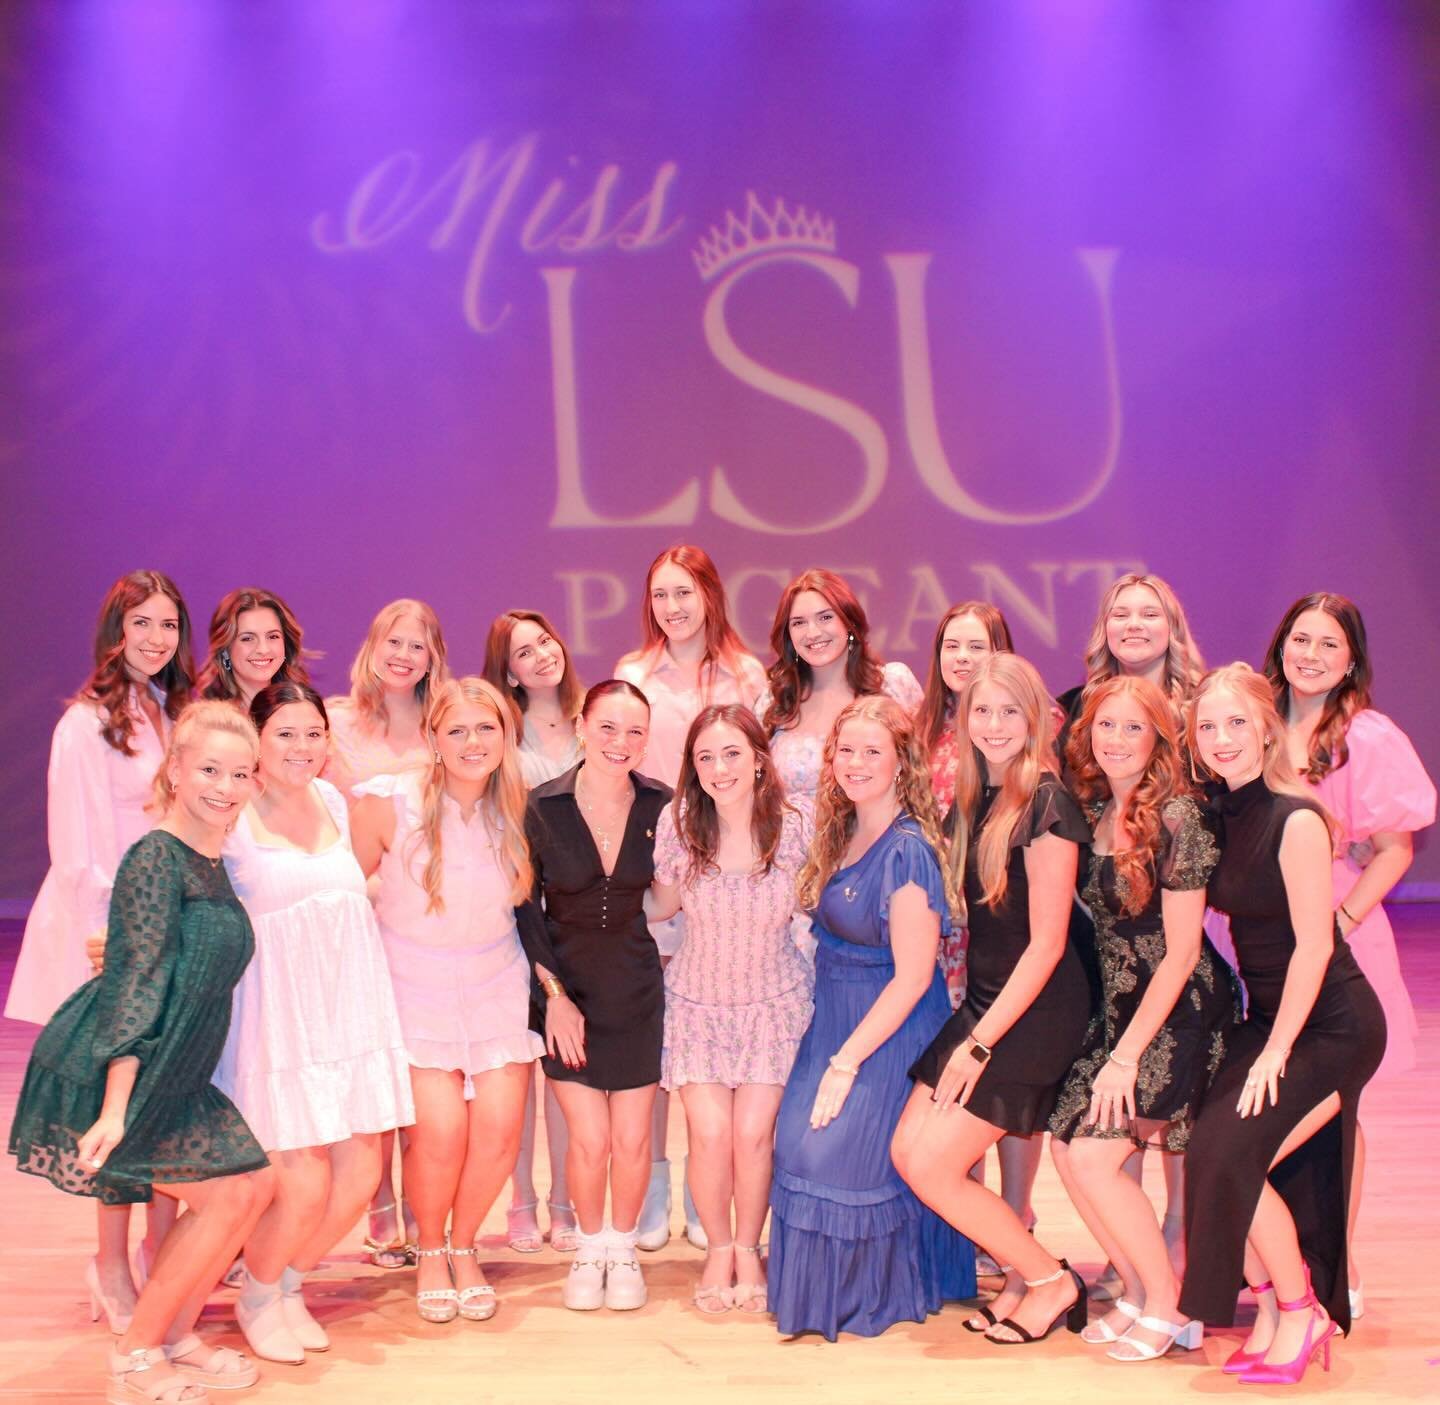 We&rsquo;re thrilled to share that the Miss LSU Pageant successfully raised a grand total of $63,456.20. Our national philanthropy, the Starkey Hearing Foundation, will receive $40,060.90 to support their upcoming mission to extend the precious gift 